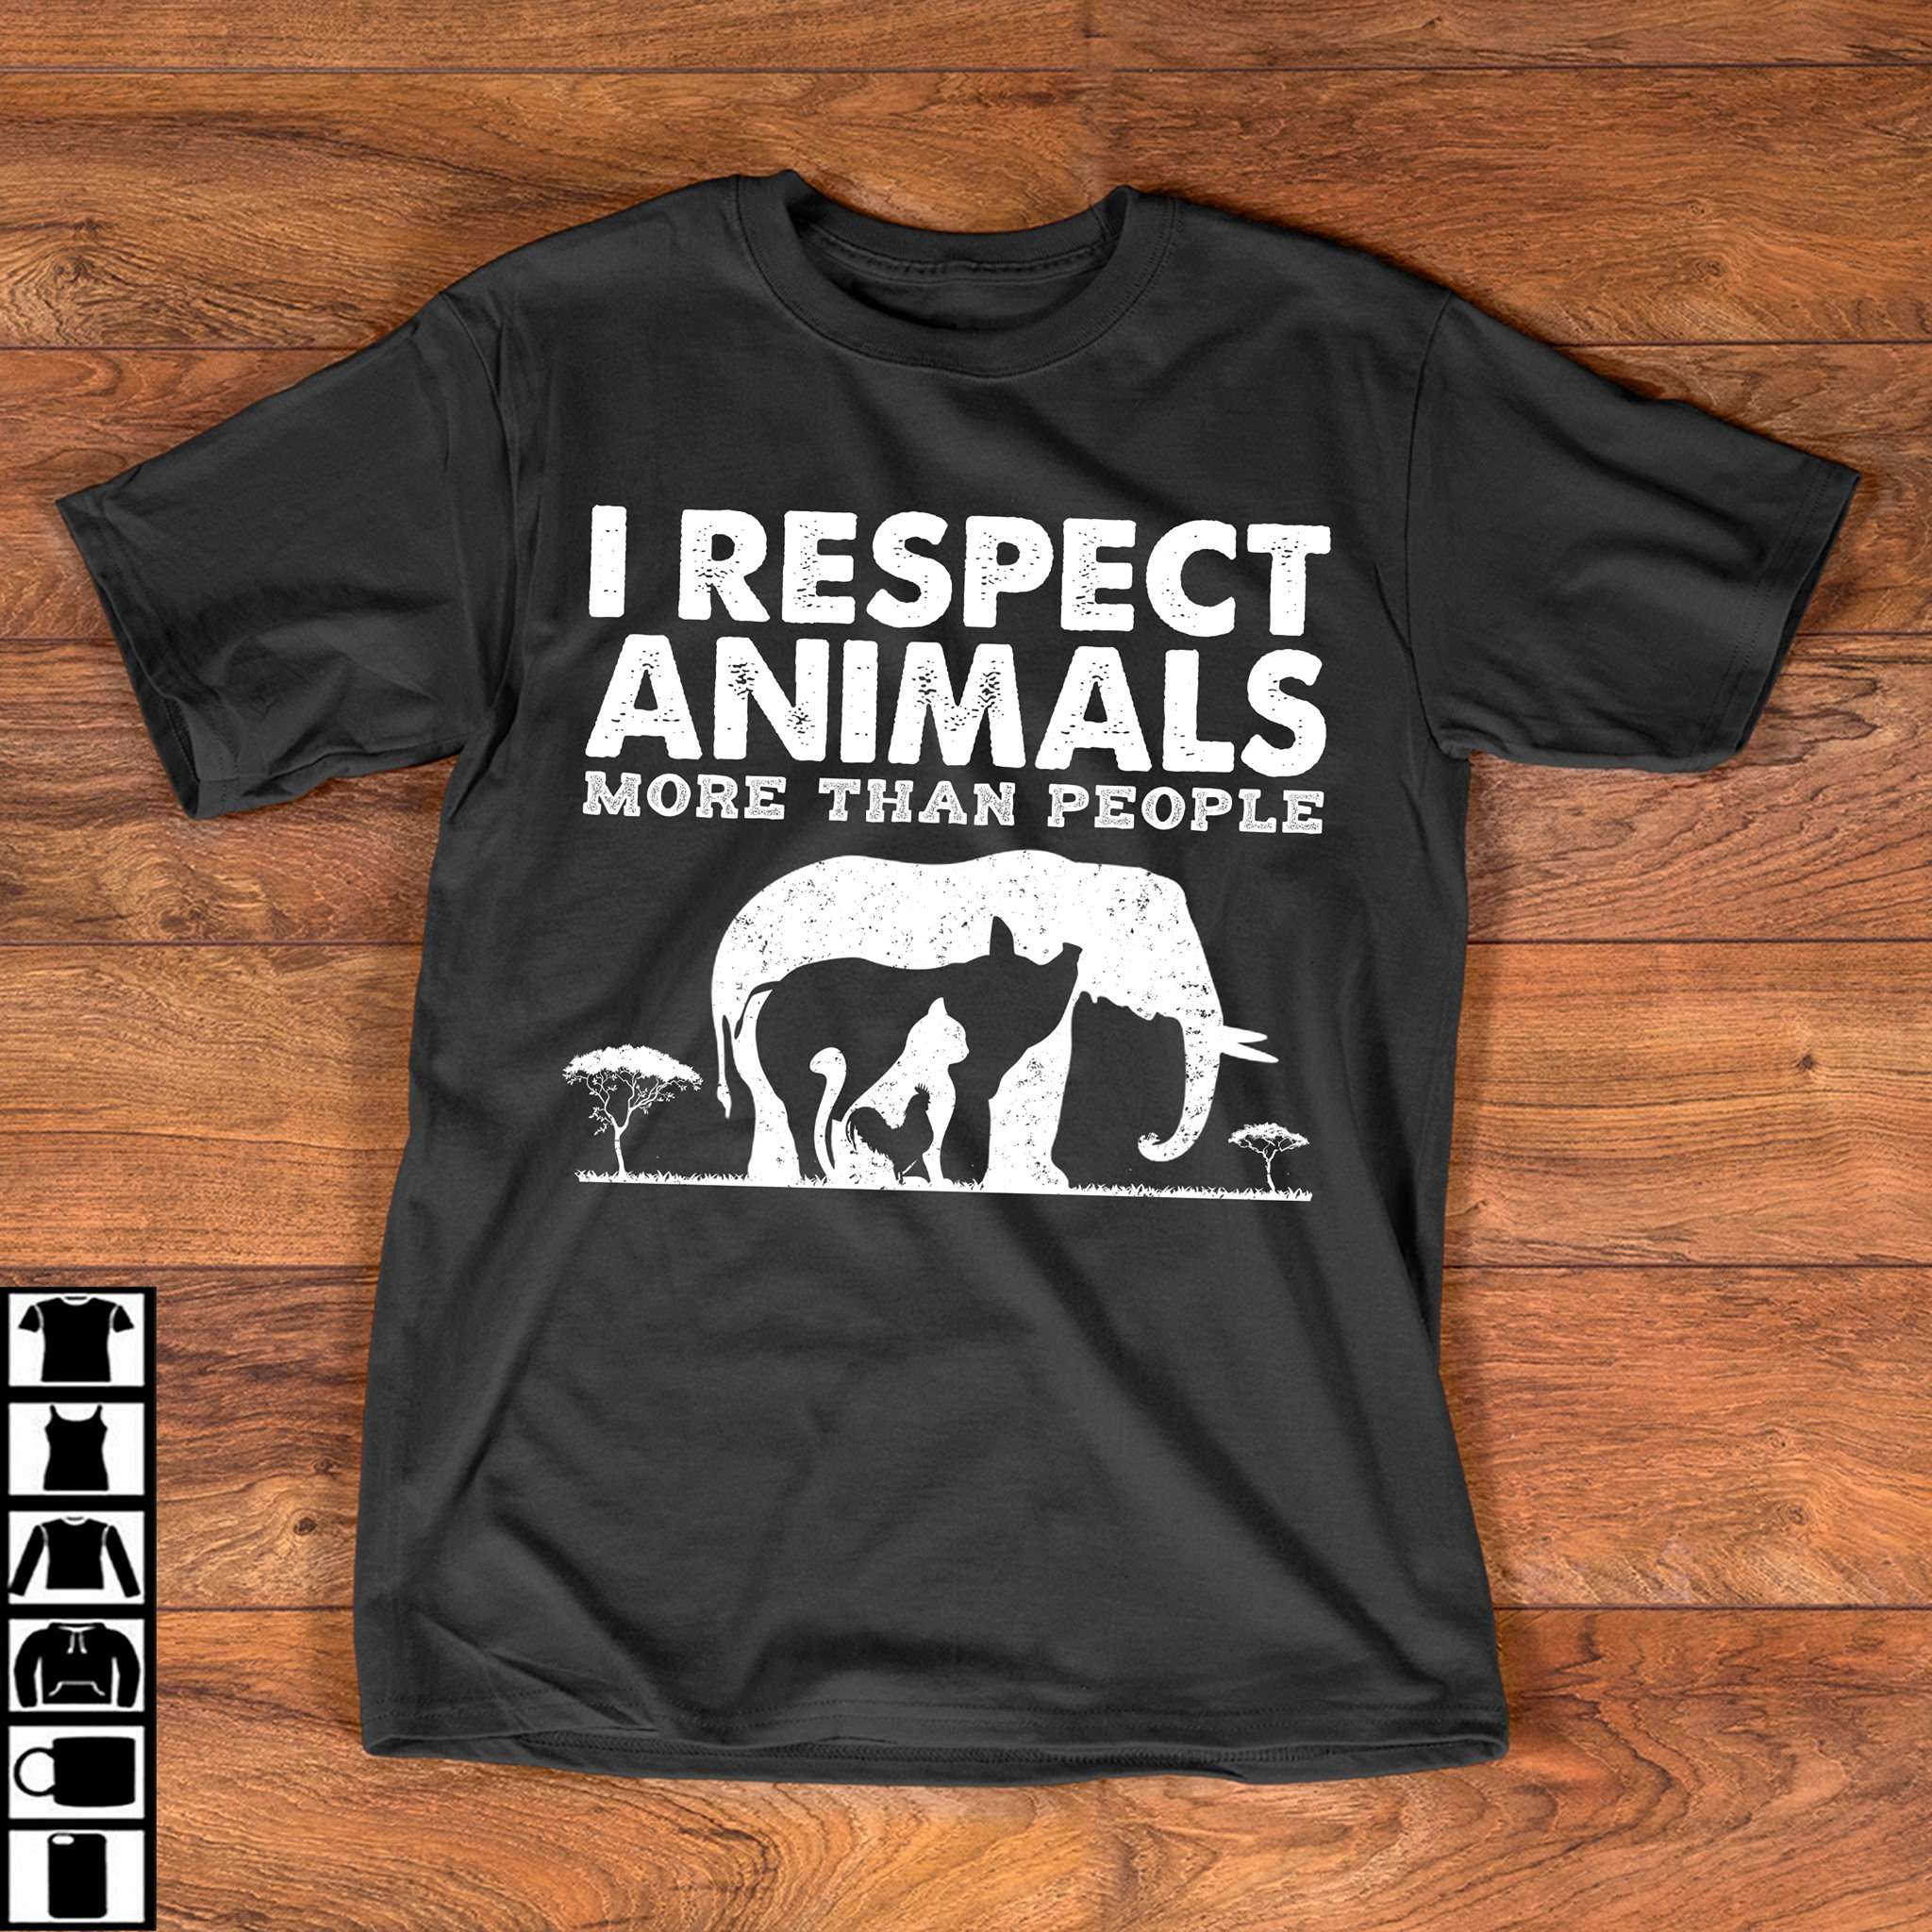 I respect animal more than people - Animal respectation, give animal respect